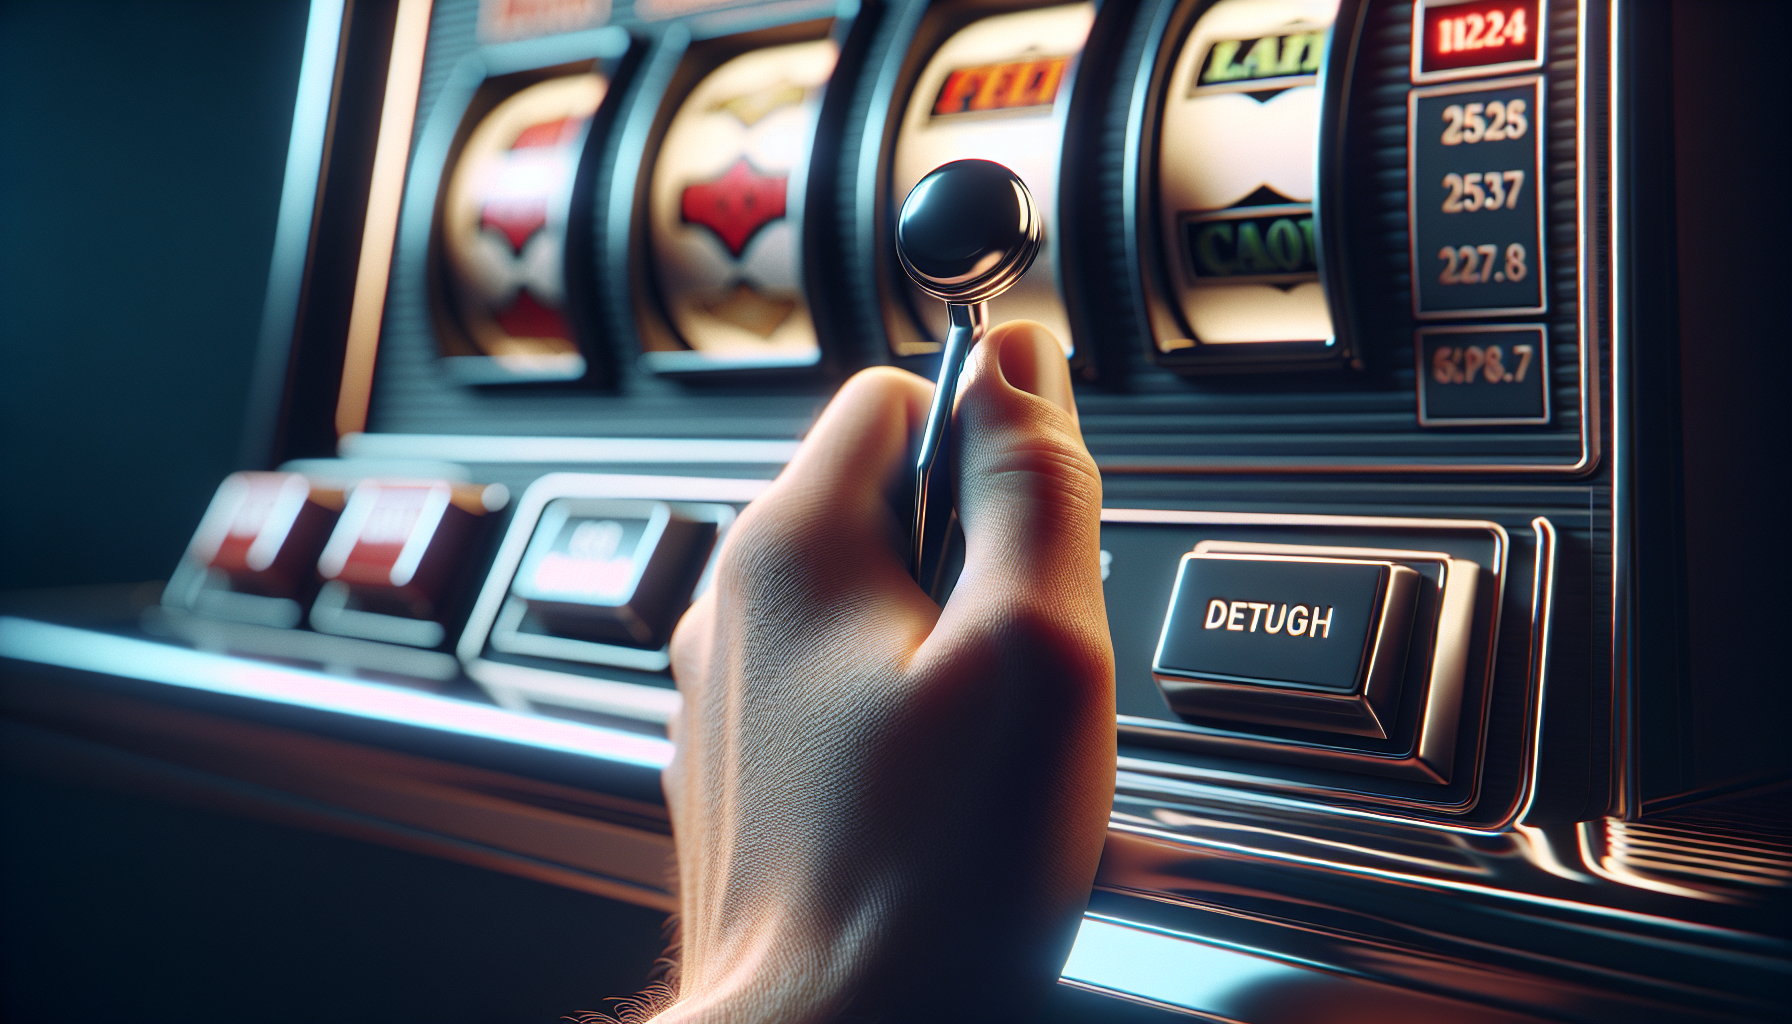 What Is The Most Winning Slot Game?